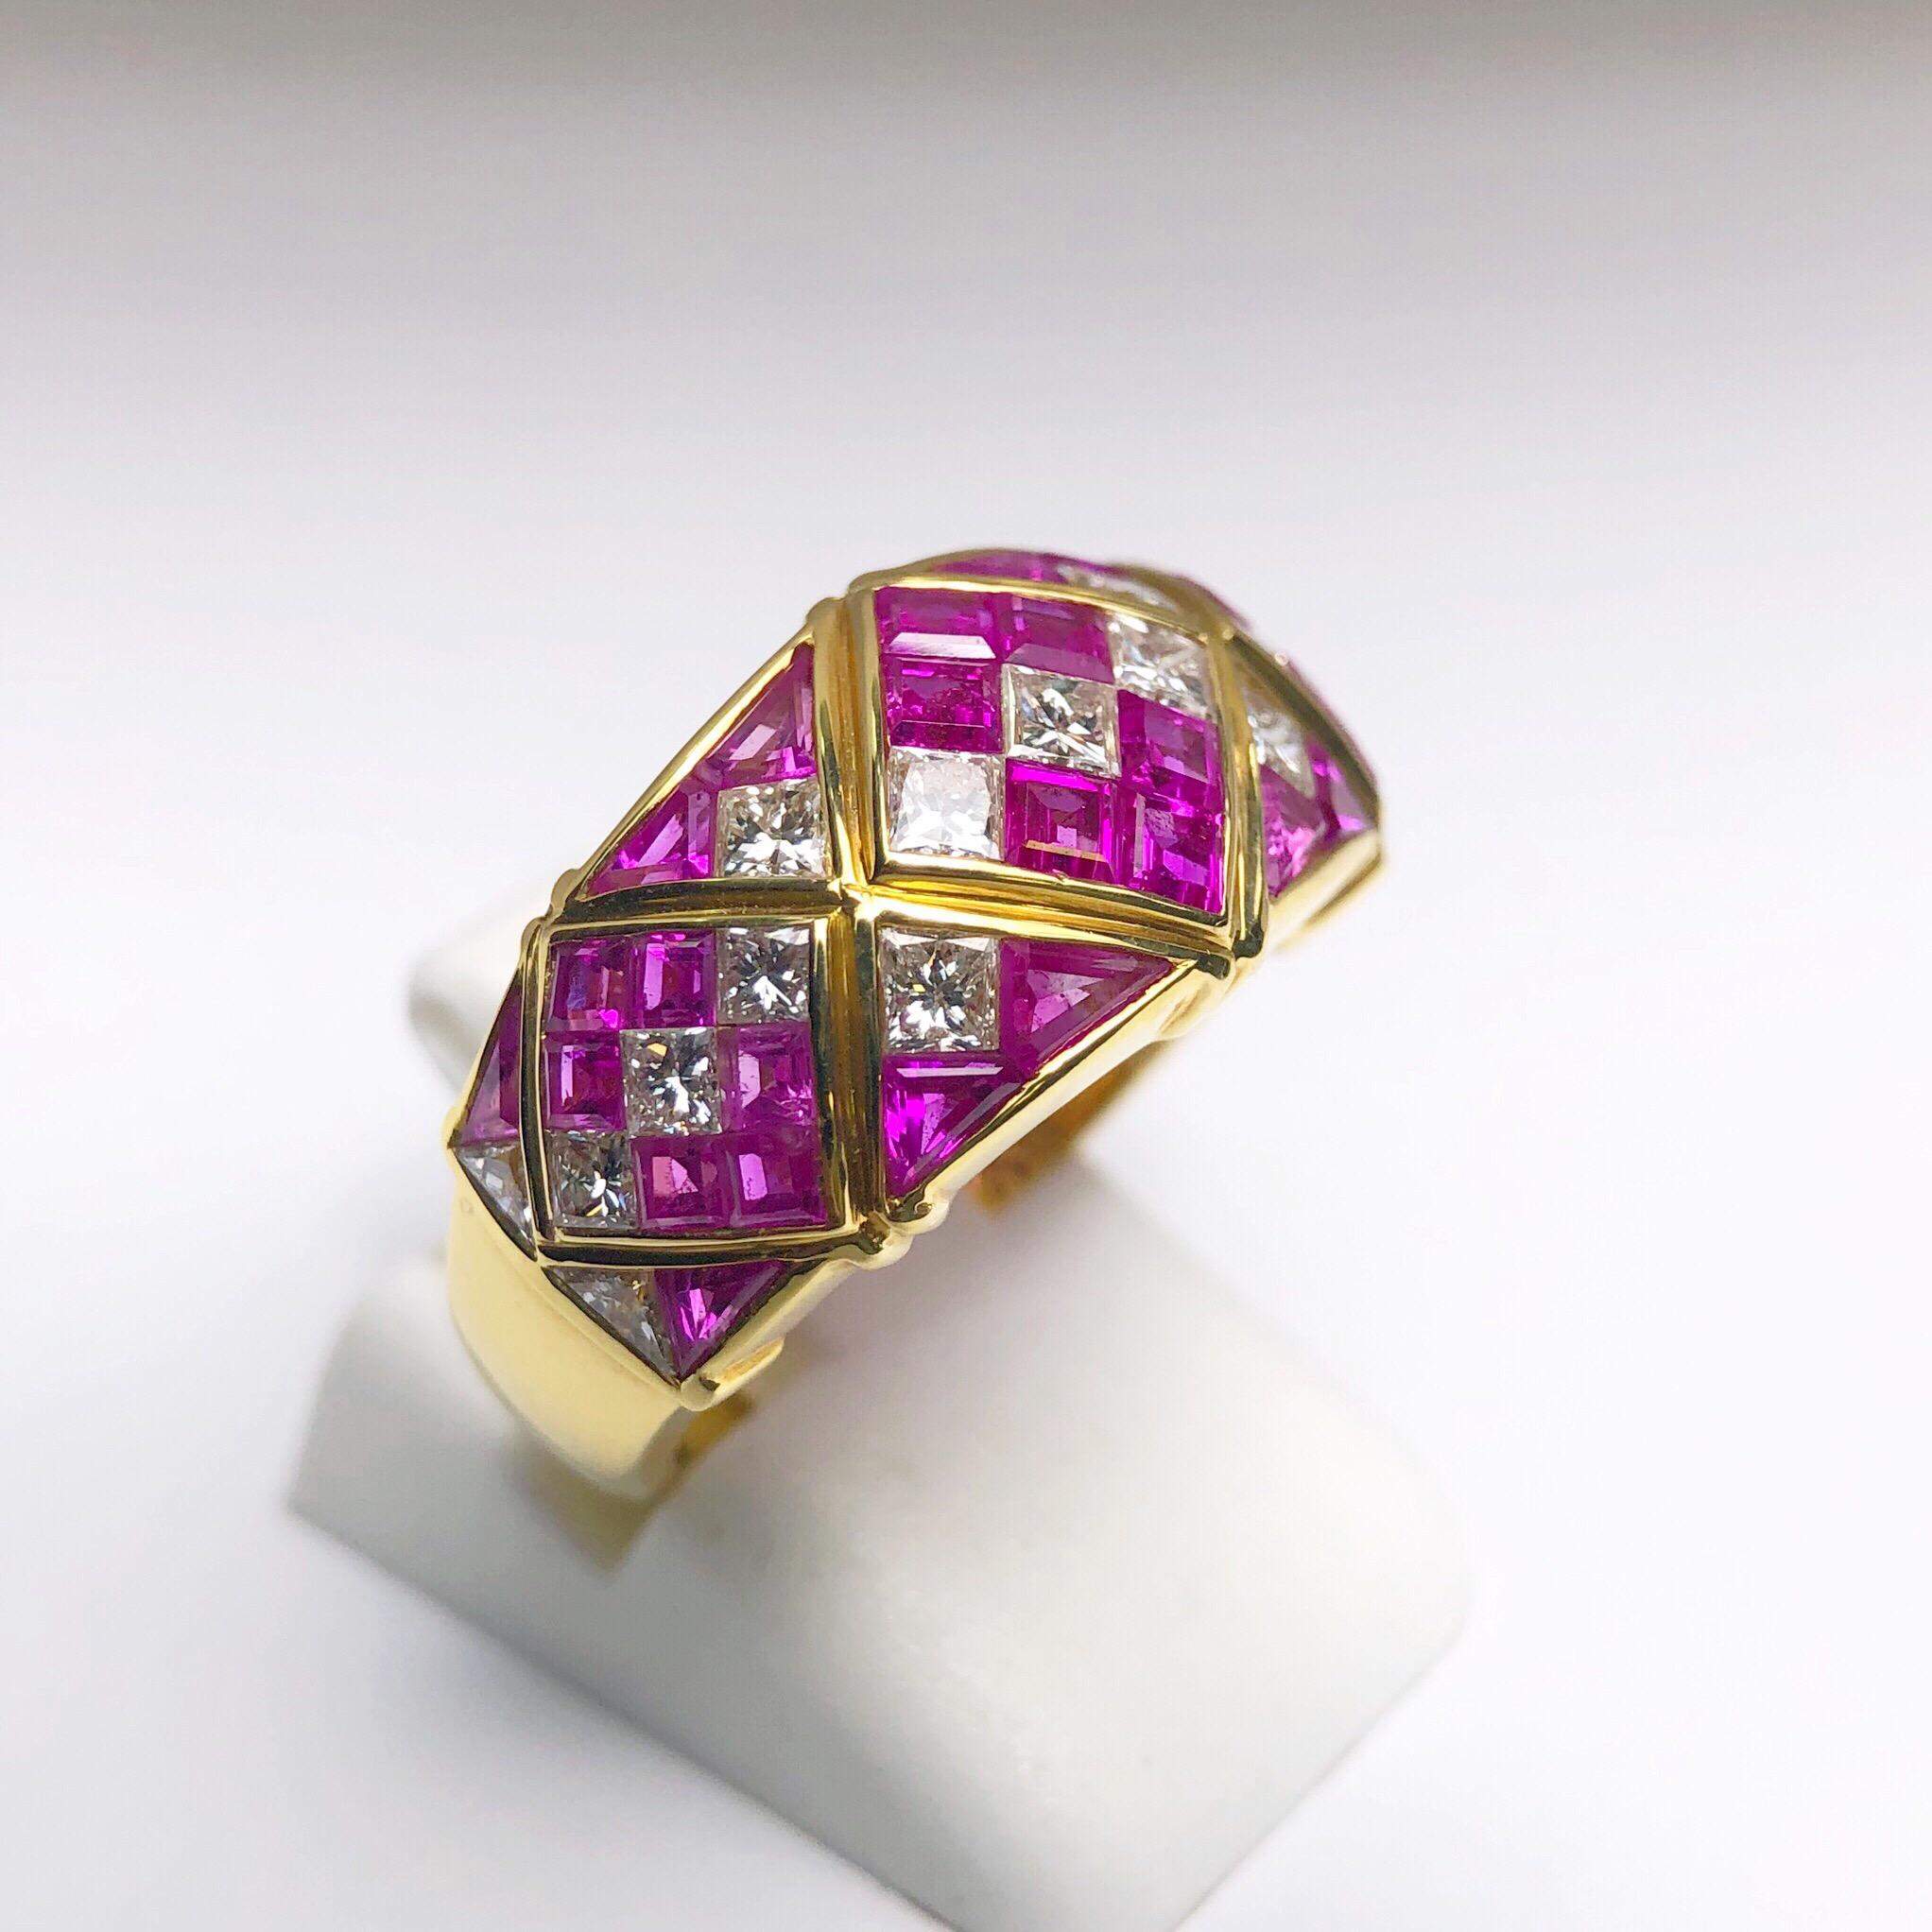 Designed with 4.78 carats of square calibre cut Pink Sapphires and 1.20 carats of princess cut White  Diamonds, this vintage ring remains timeless. Set in 18 karat yellow gold, the stone portion of the ring  measures approximately 7/8